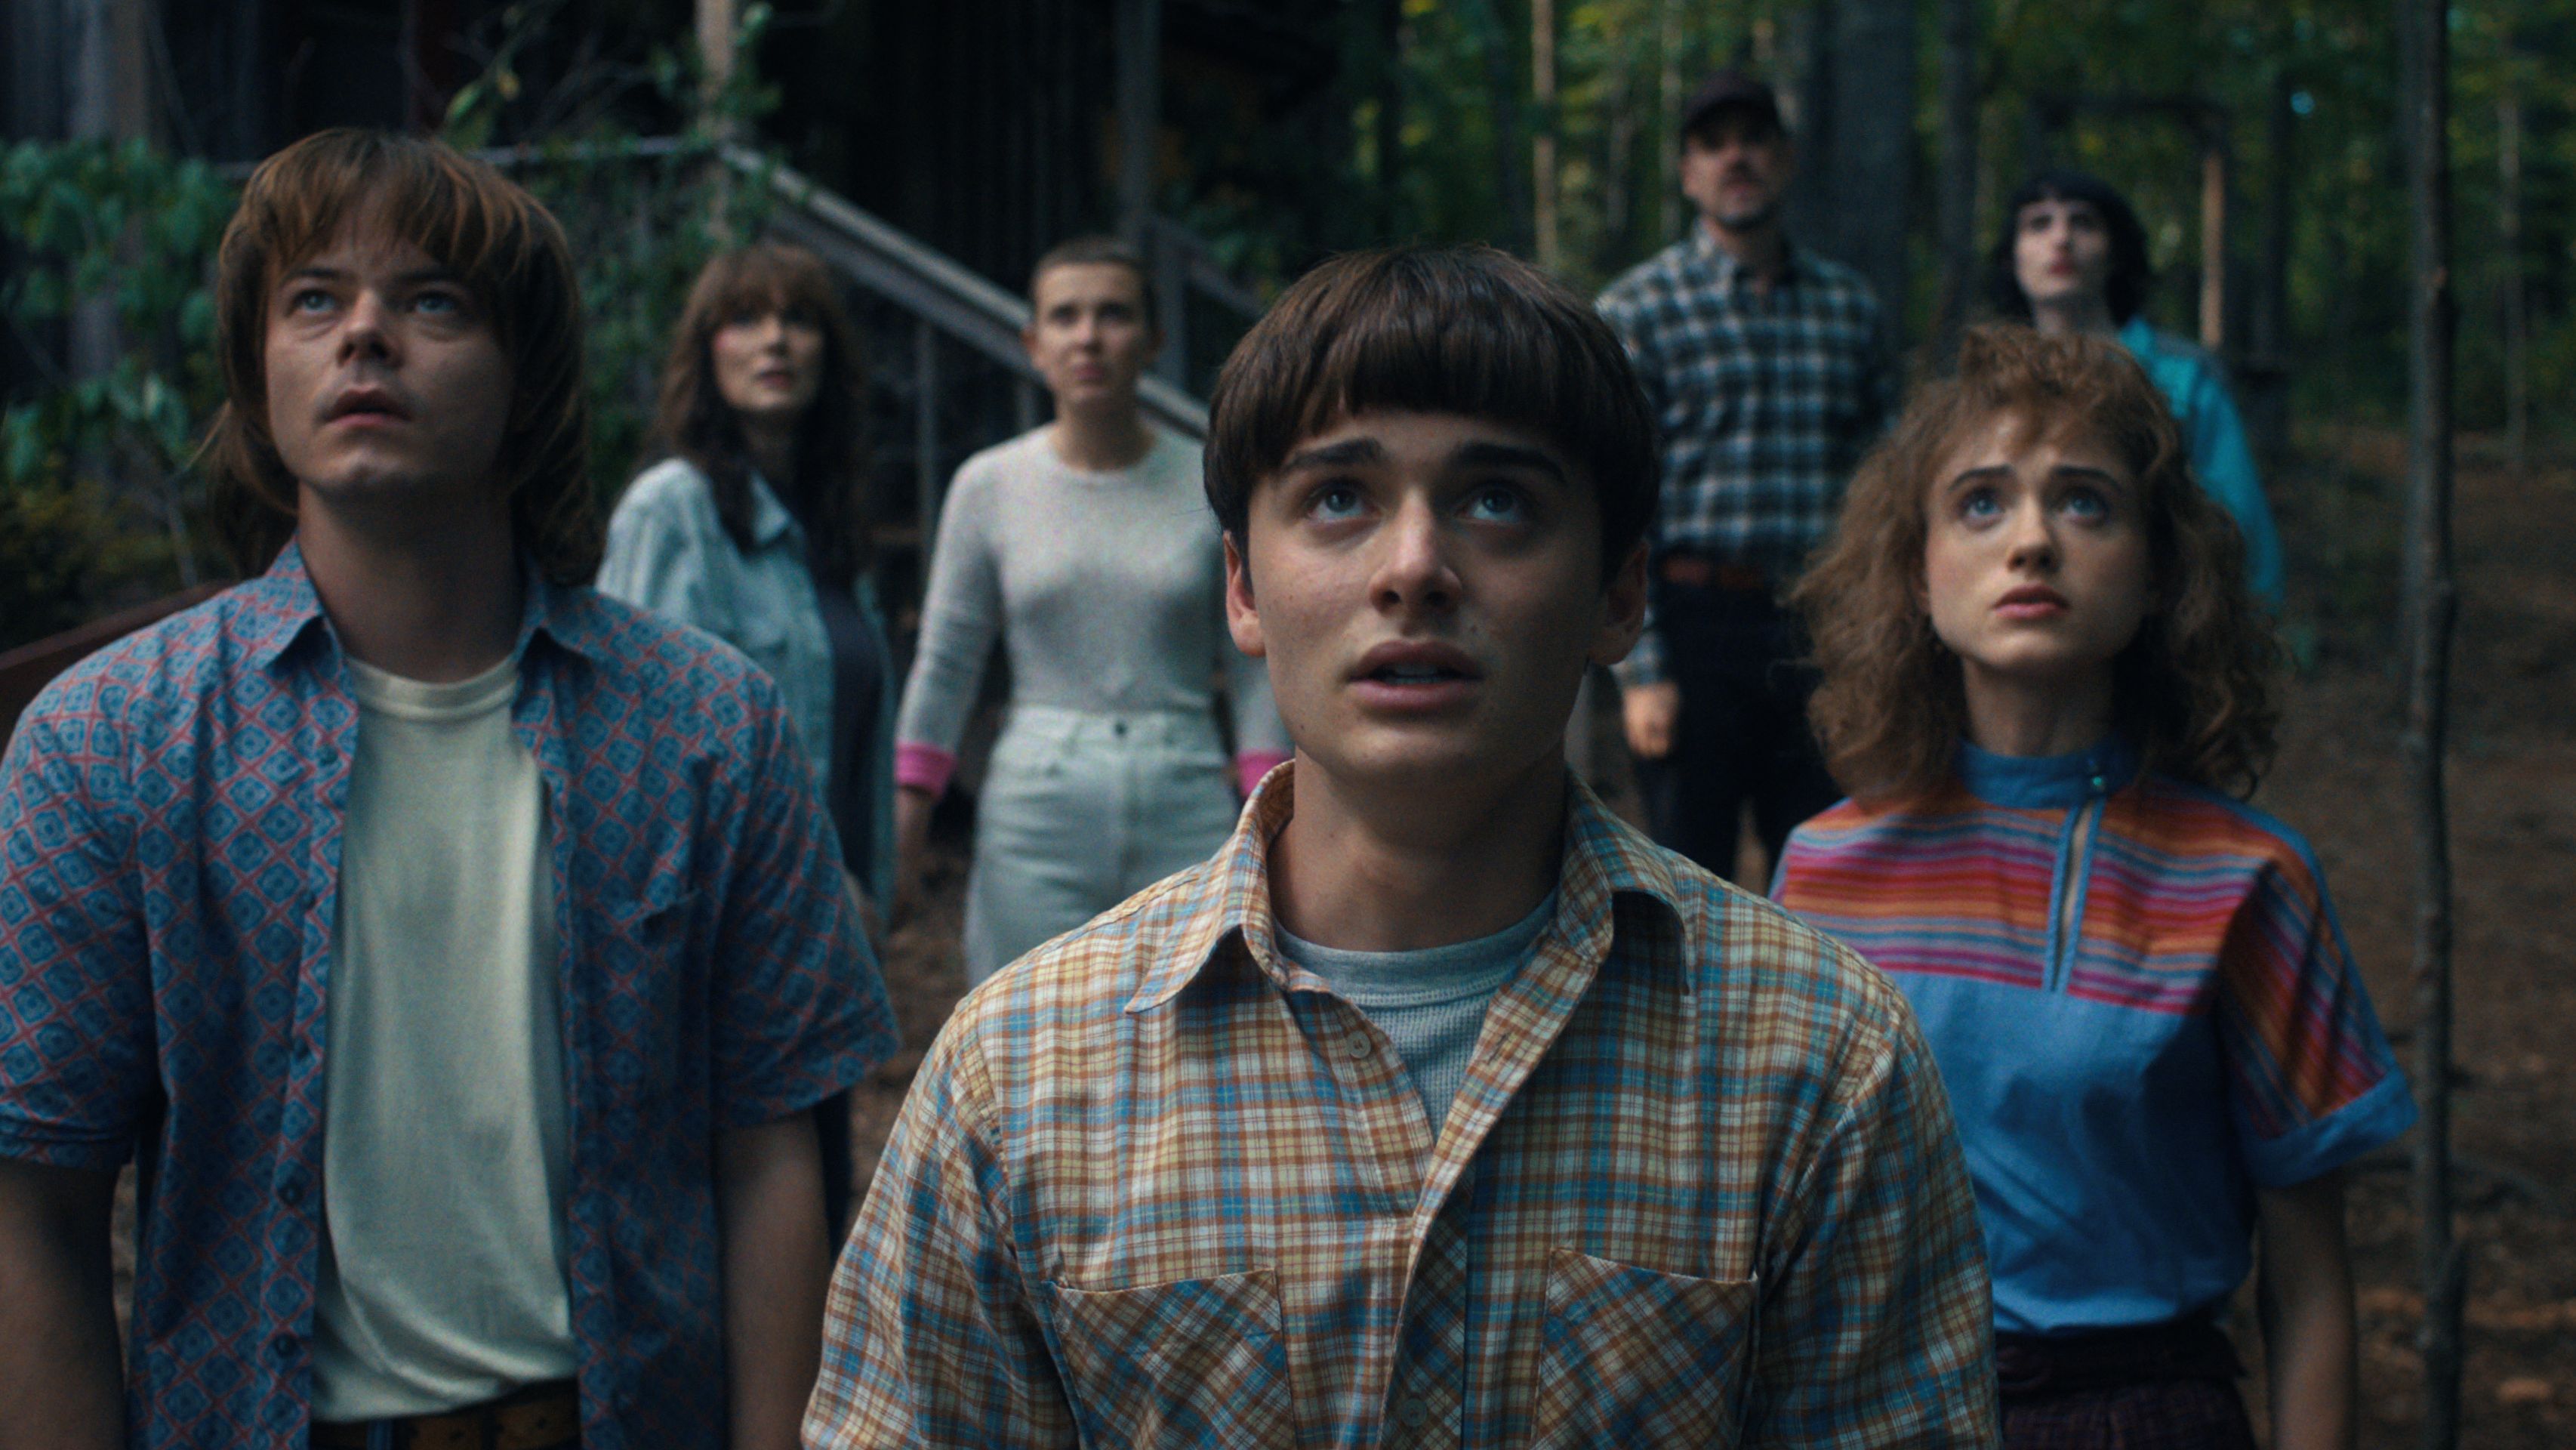 Stranger Things Season 5 Update Delays Release Date Projections